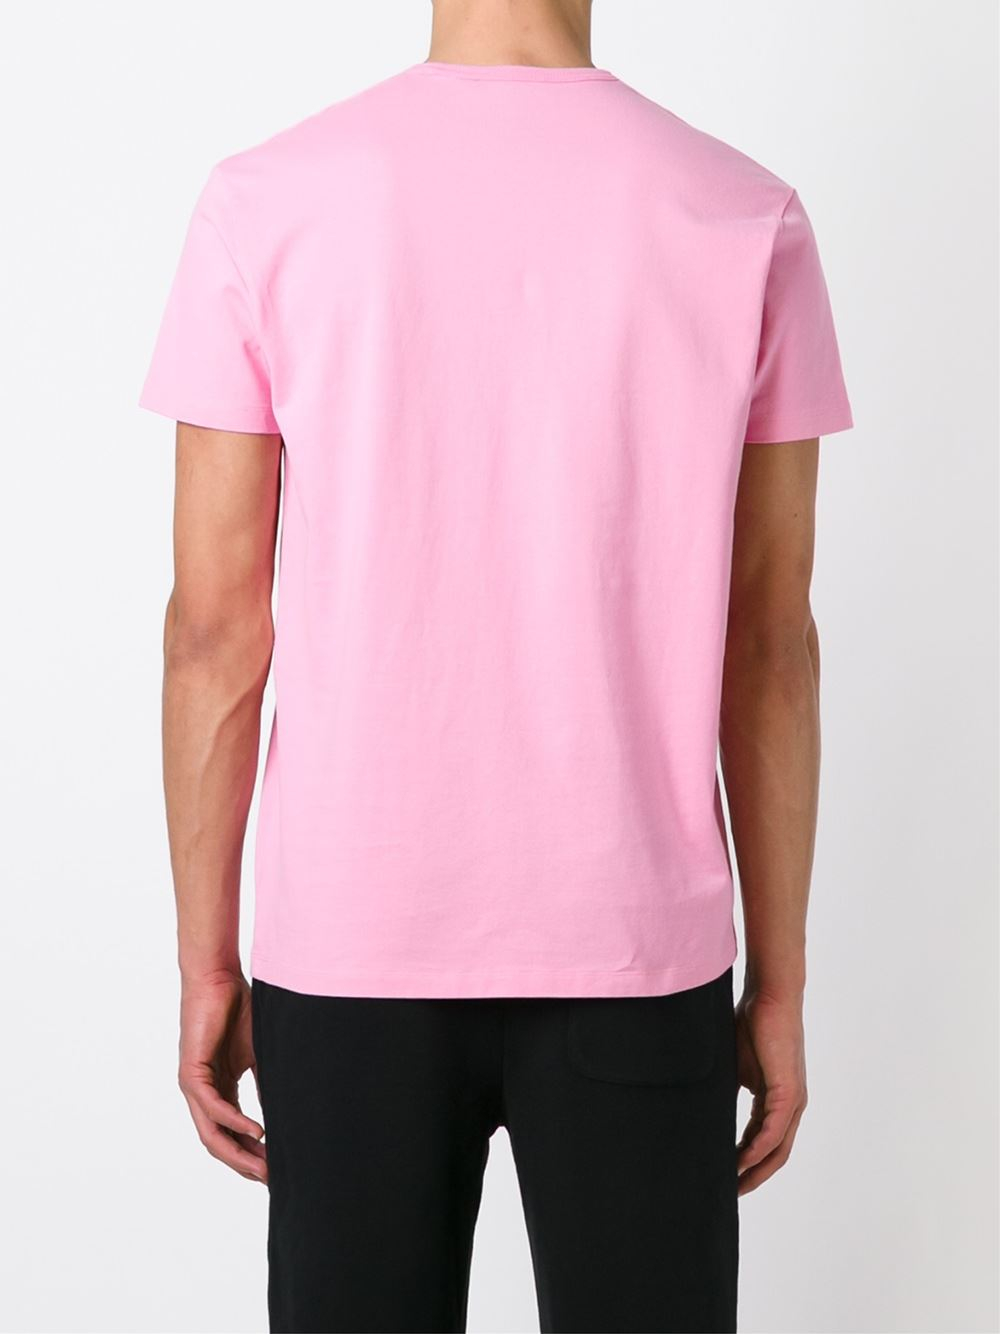 Lyst - Marc By Marc Jacobs Cool School Print T-Shirt in Pink for Men